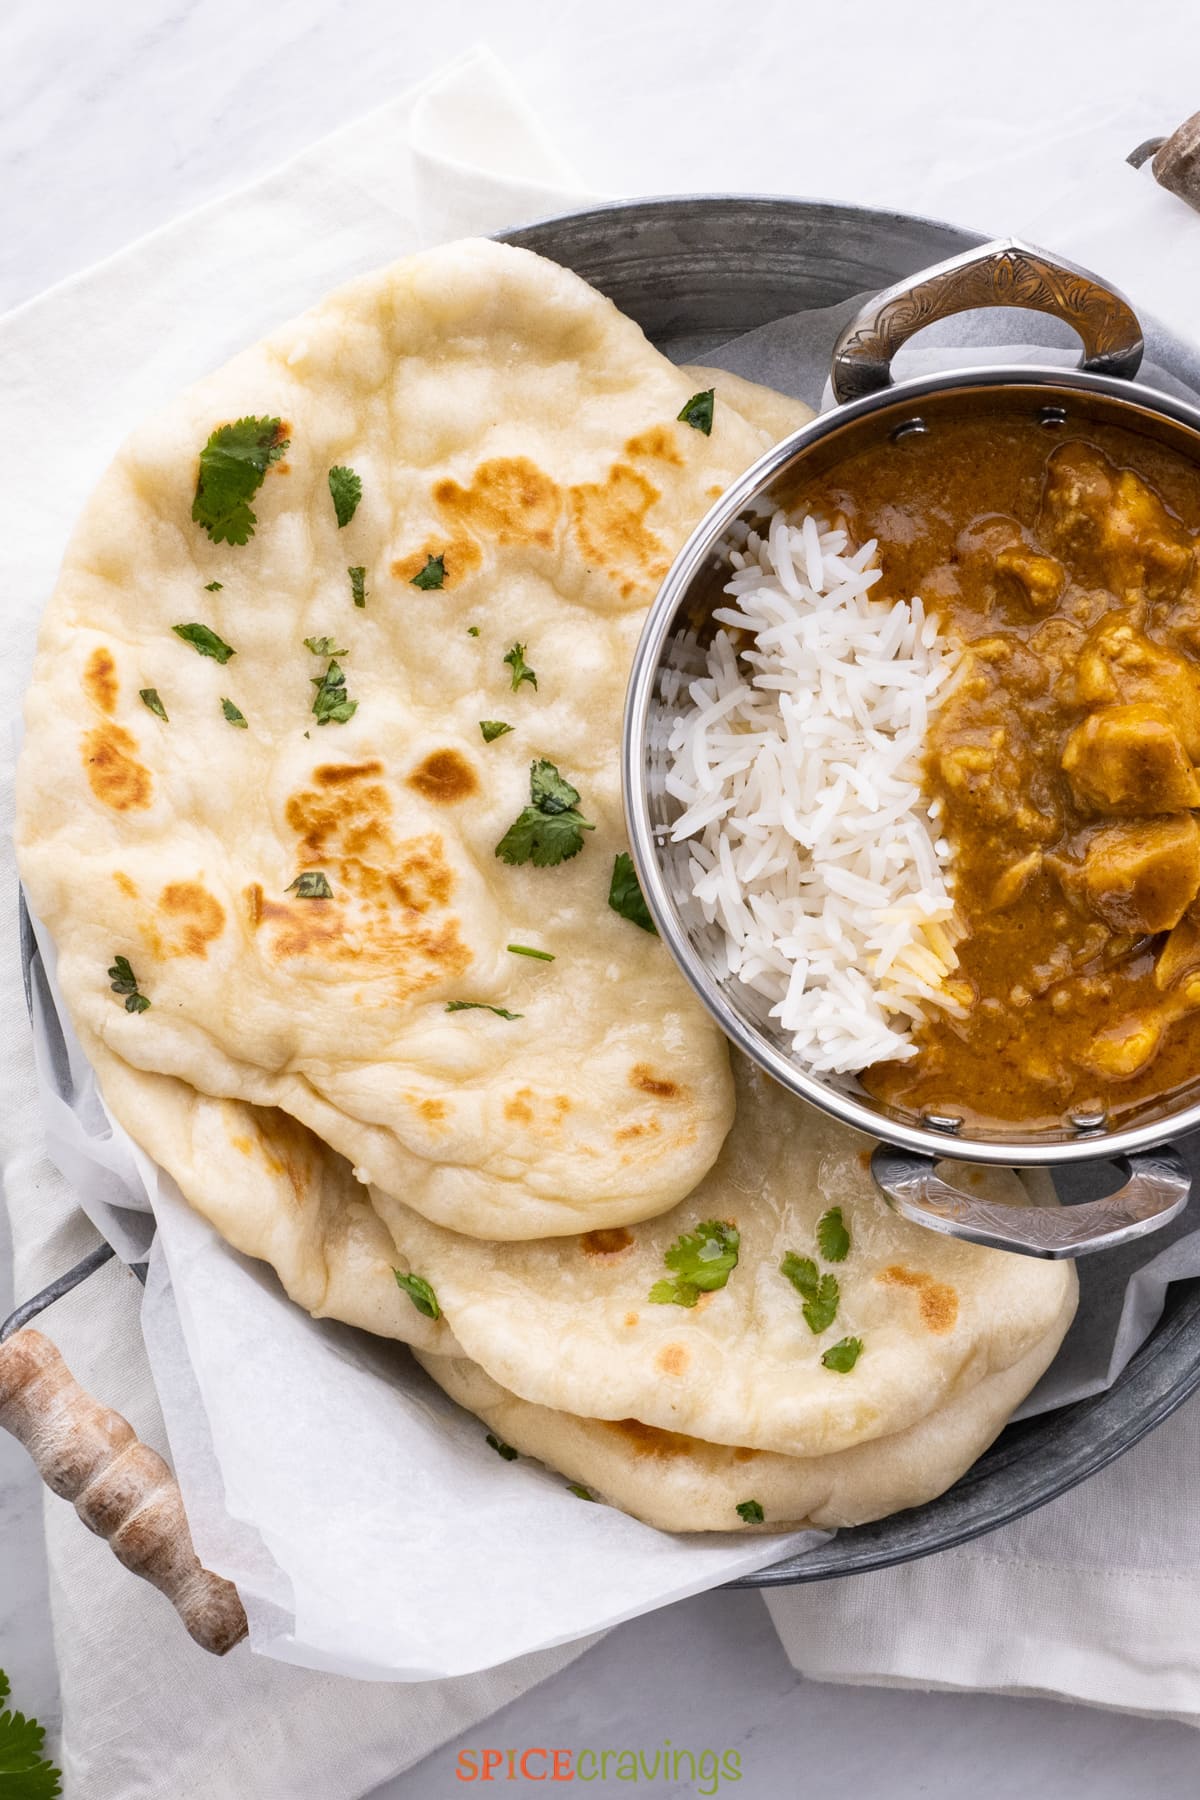 naan bread with rice and curry on side